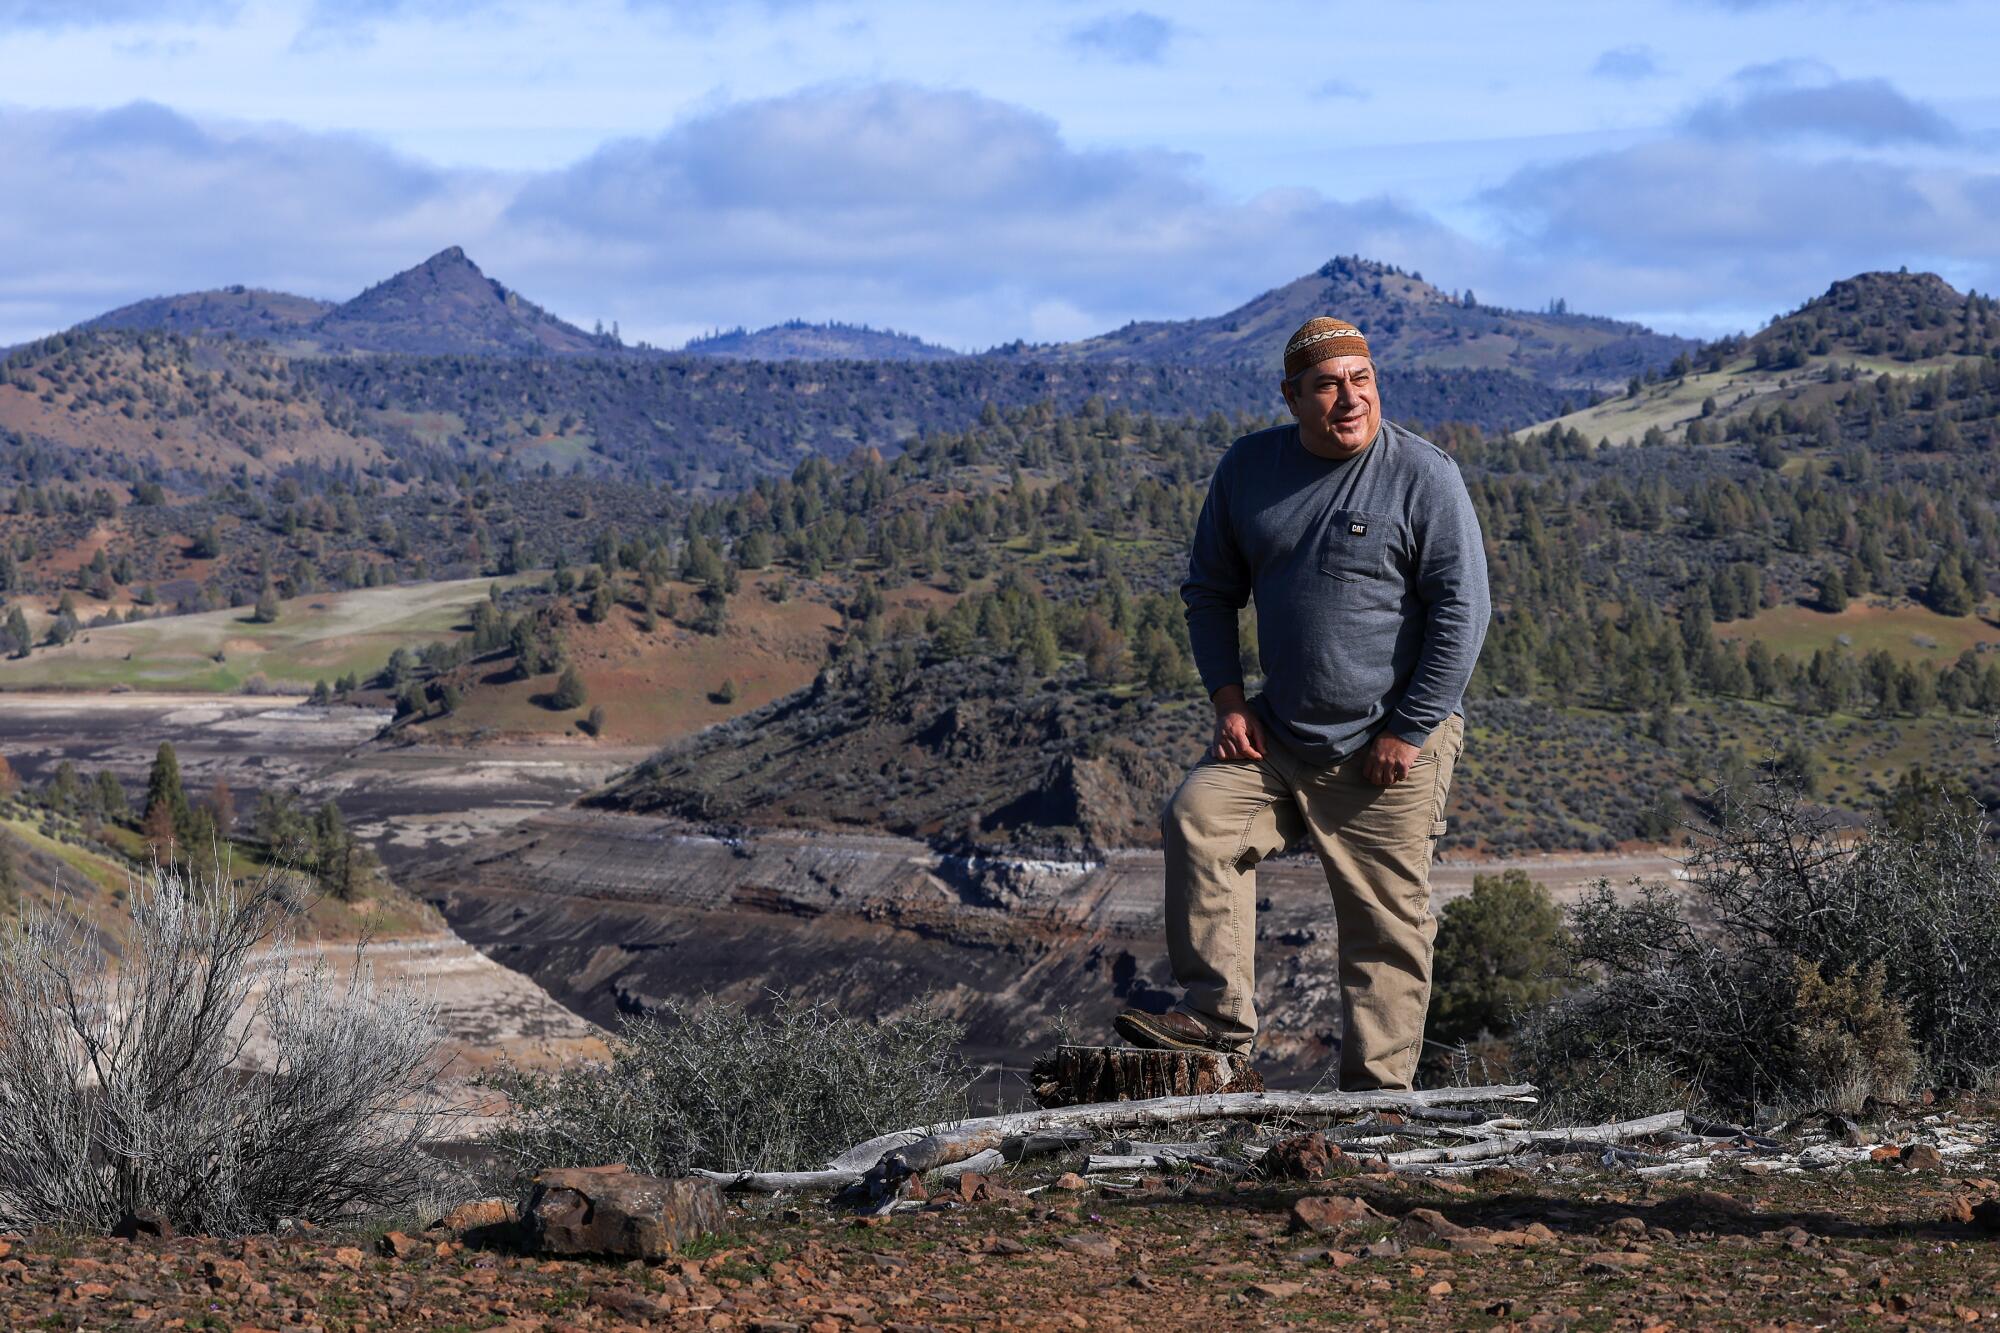 A man standing on a bluff, with a muddy reservoir, evergreen trees and hills behind him